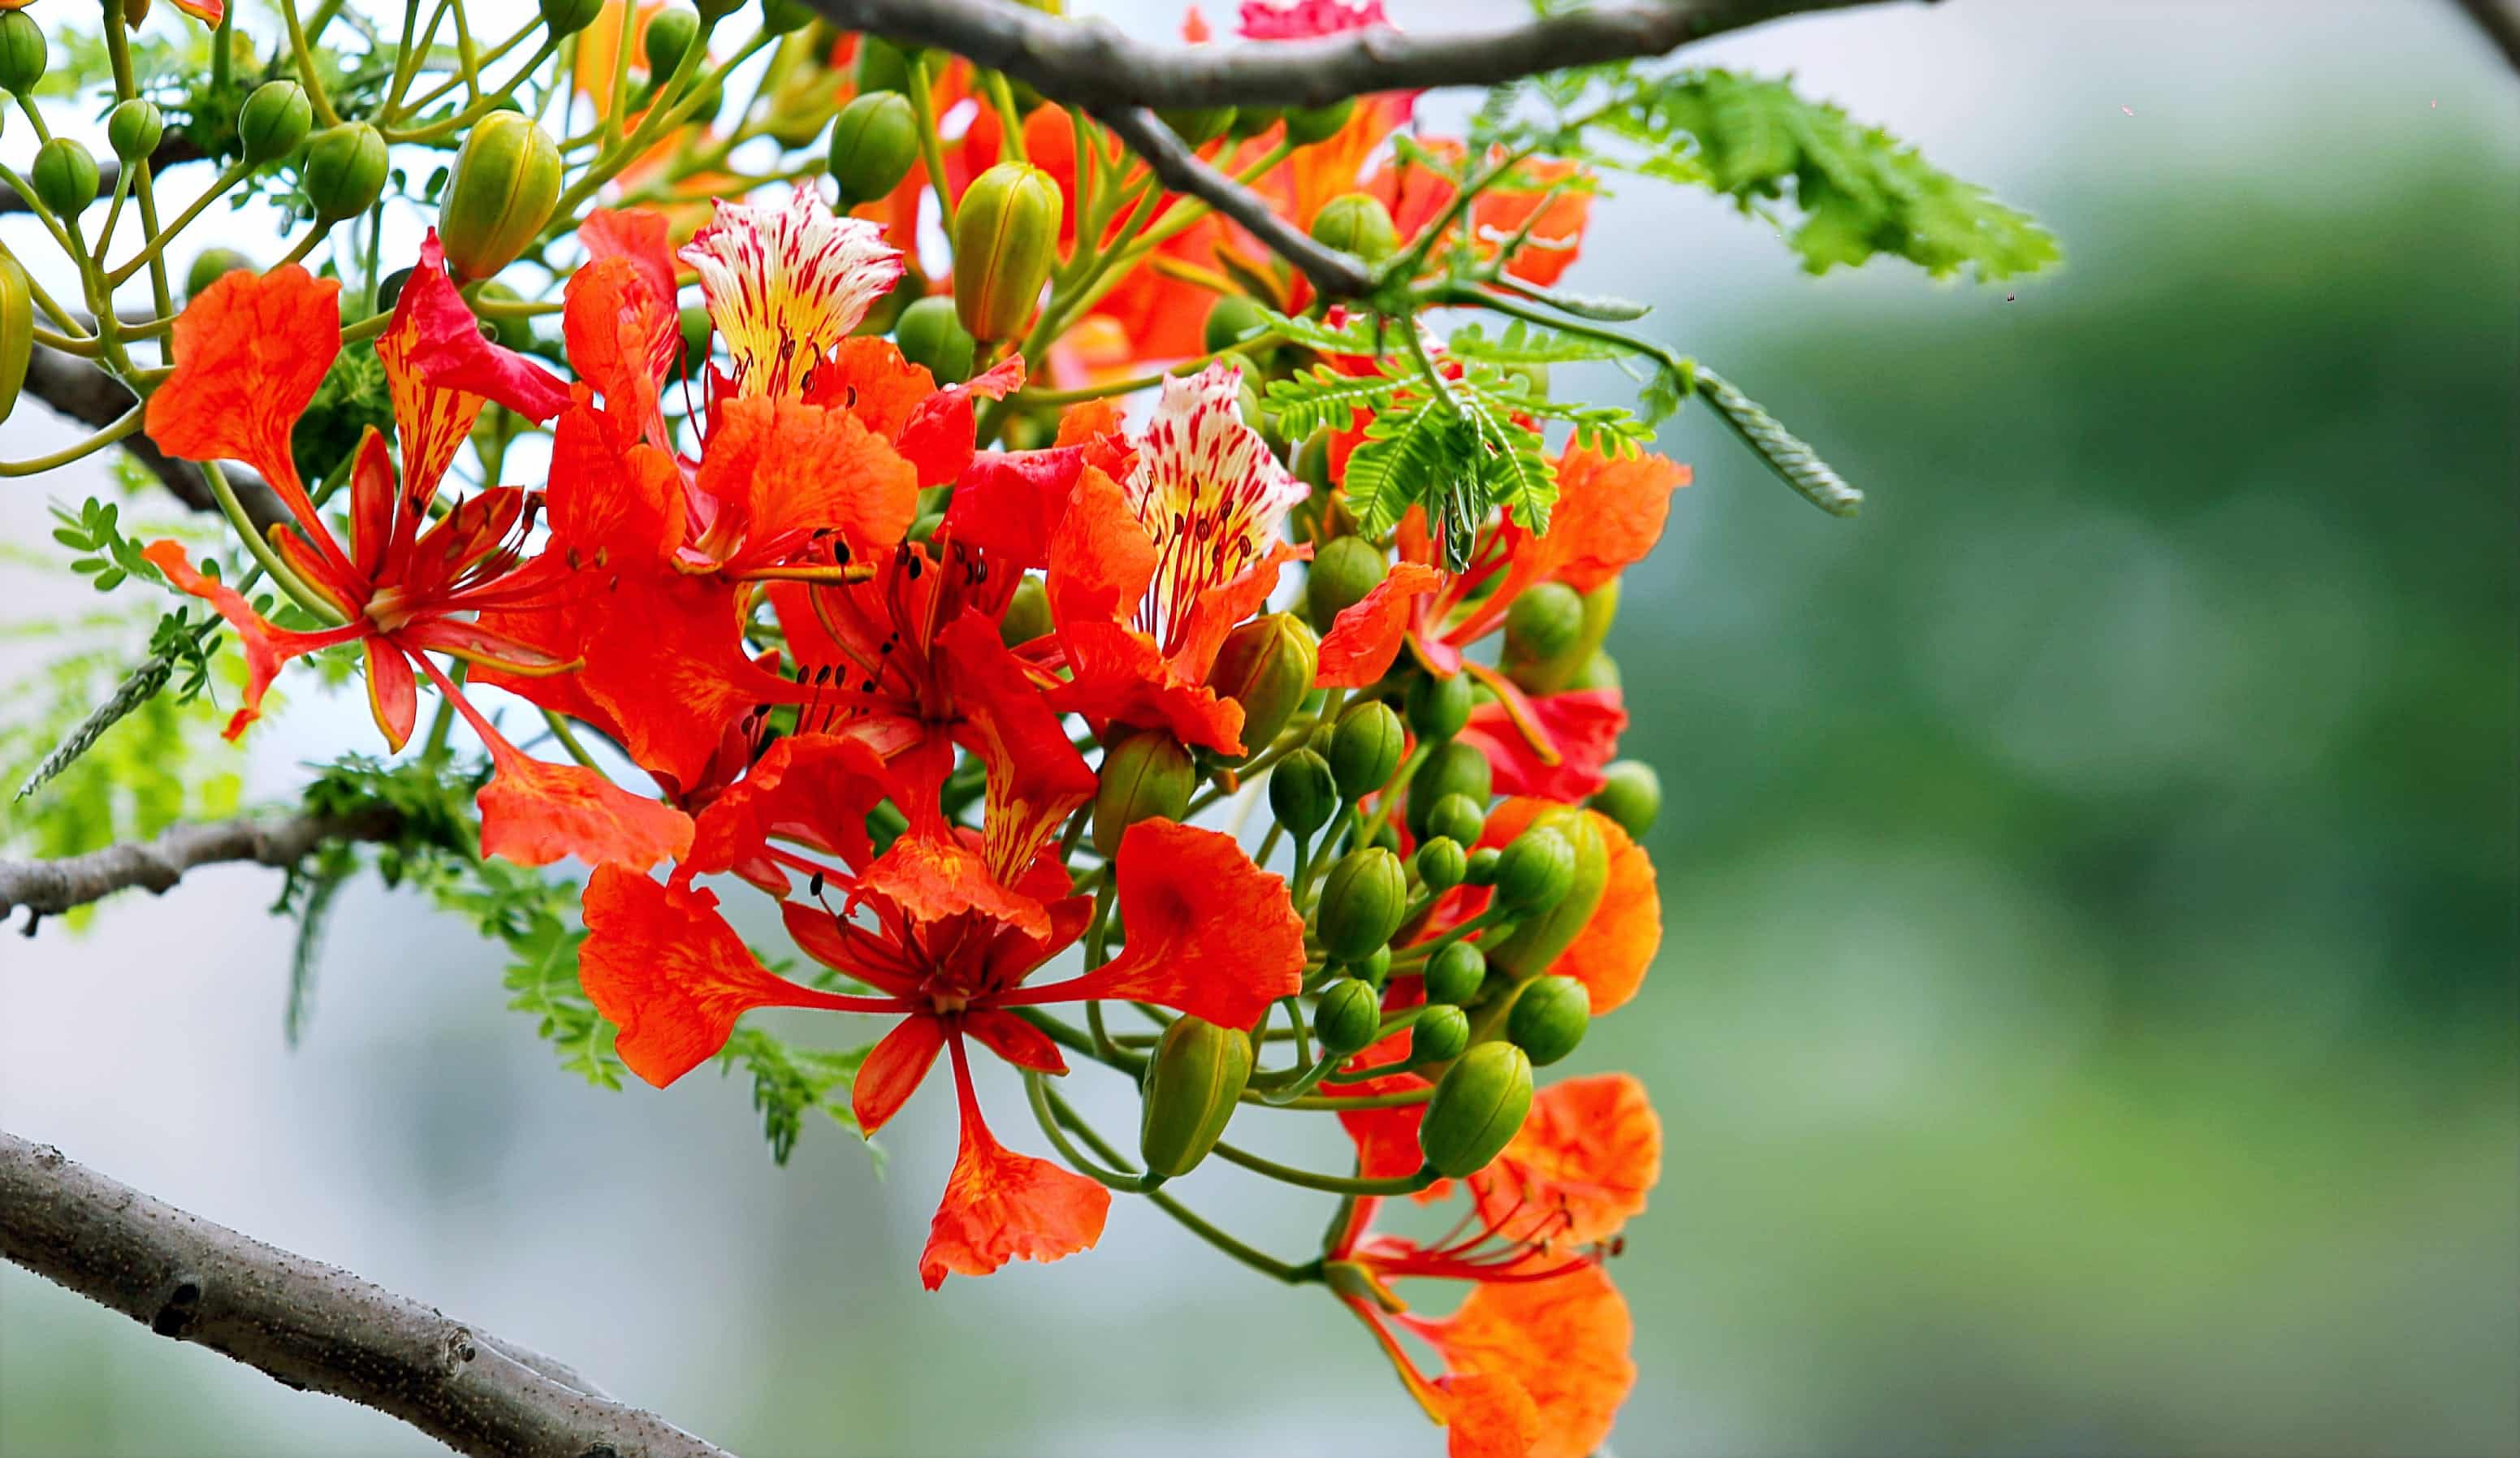 A blossom of orange and red flowers